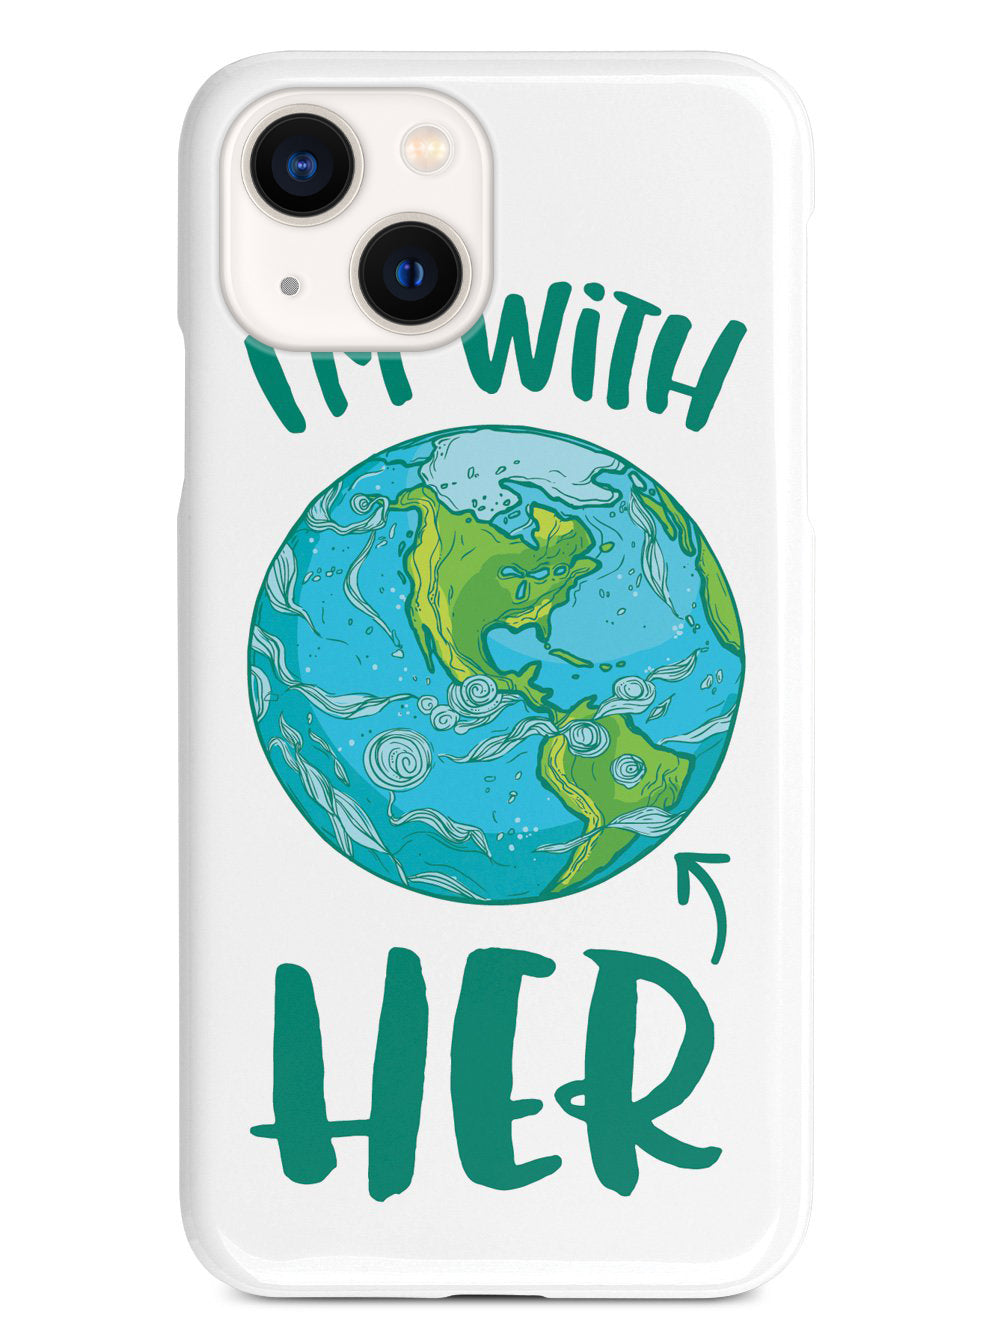 I'm with HER - March For Science Earth Supporter Case